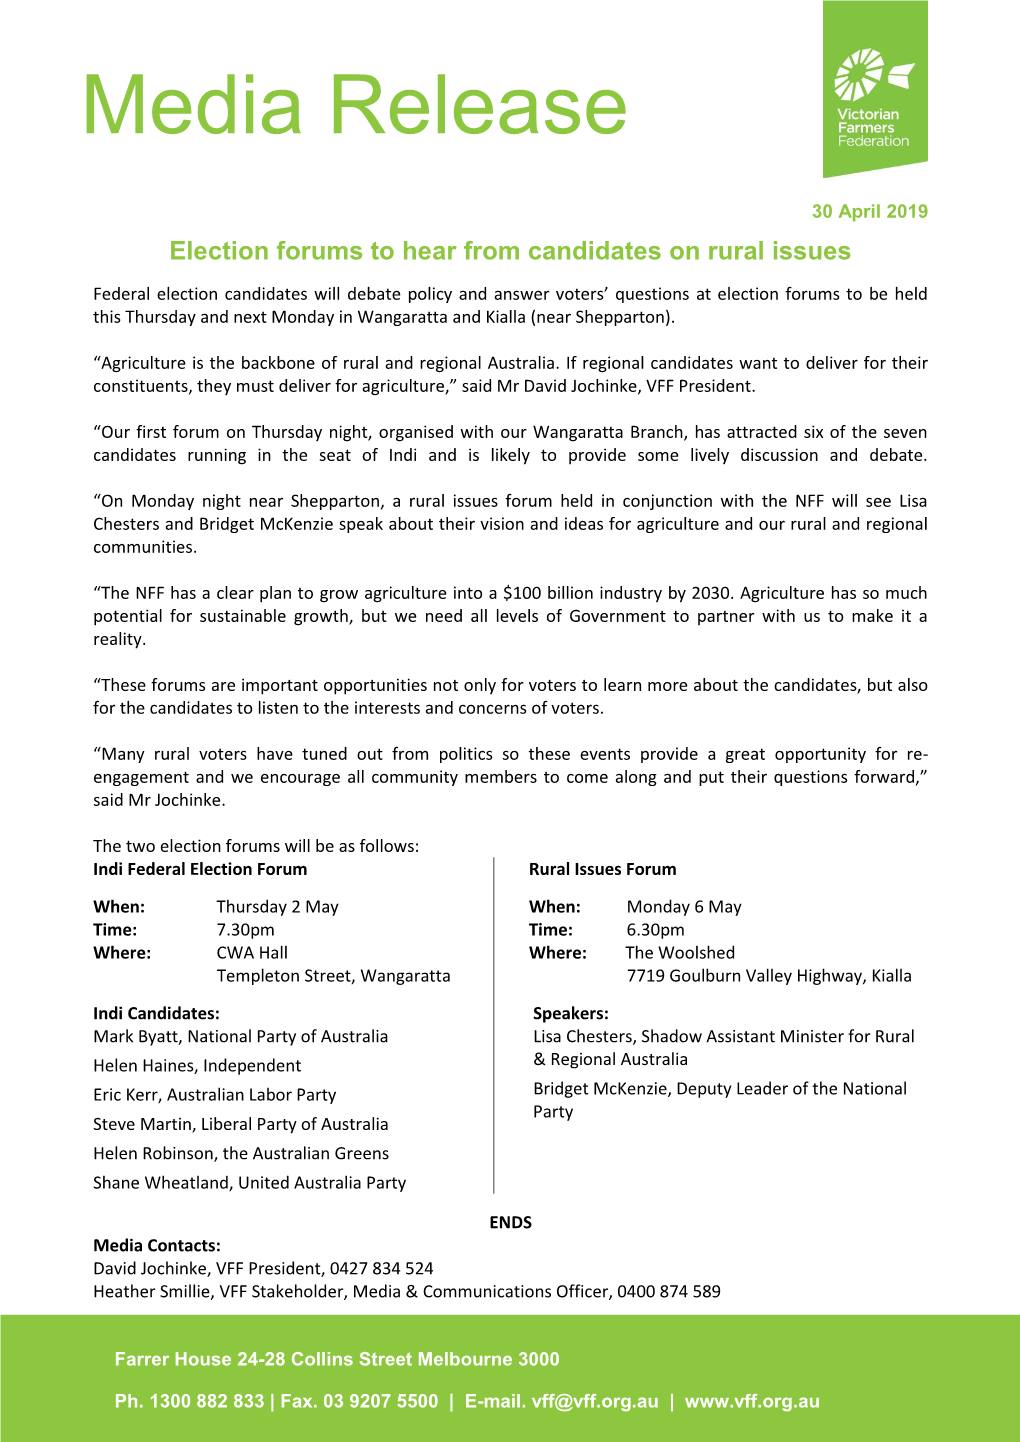 Election Forums to Hear from Candidates on Rural Issues